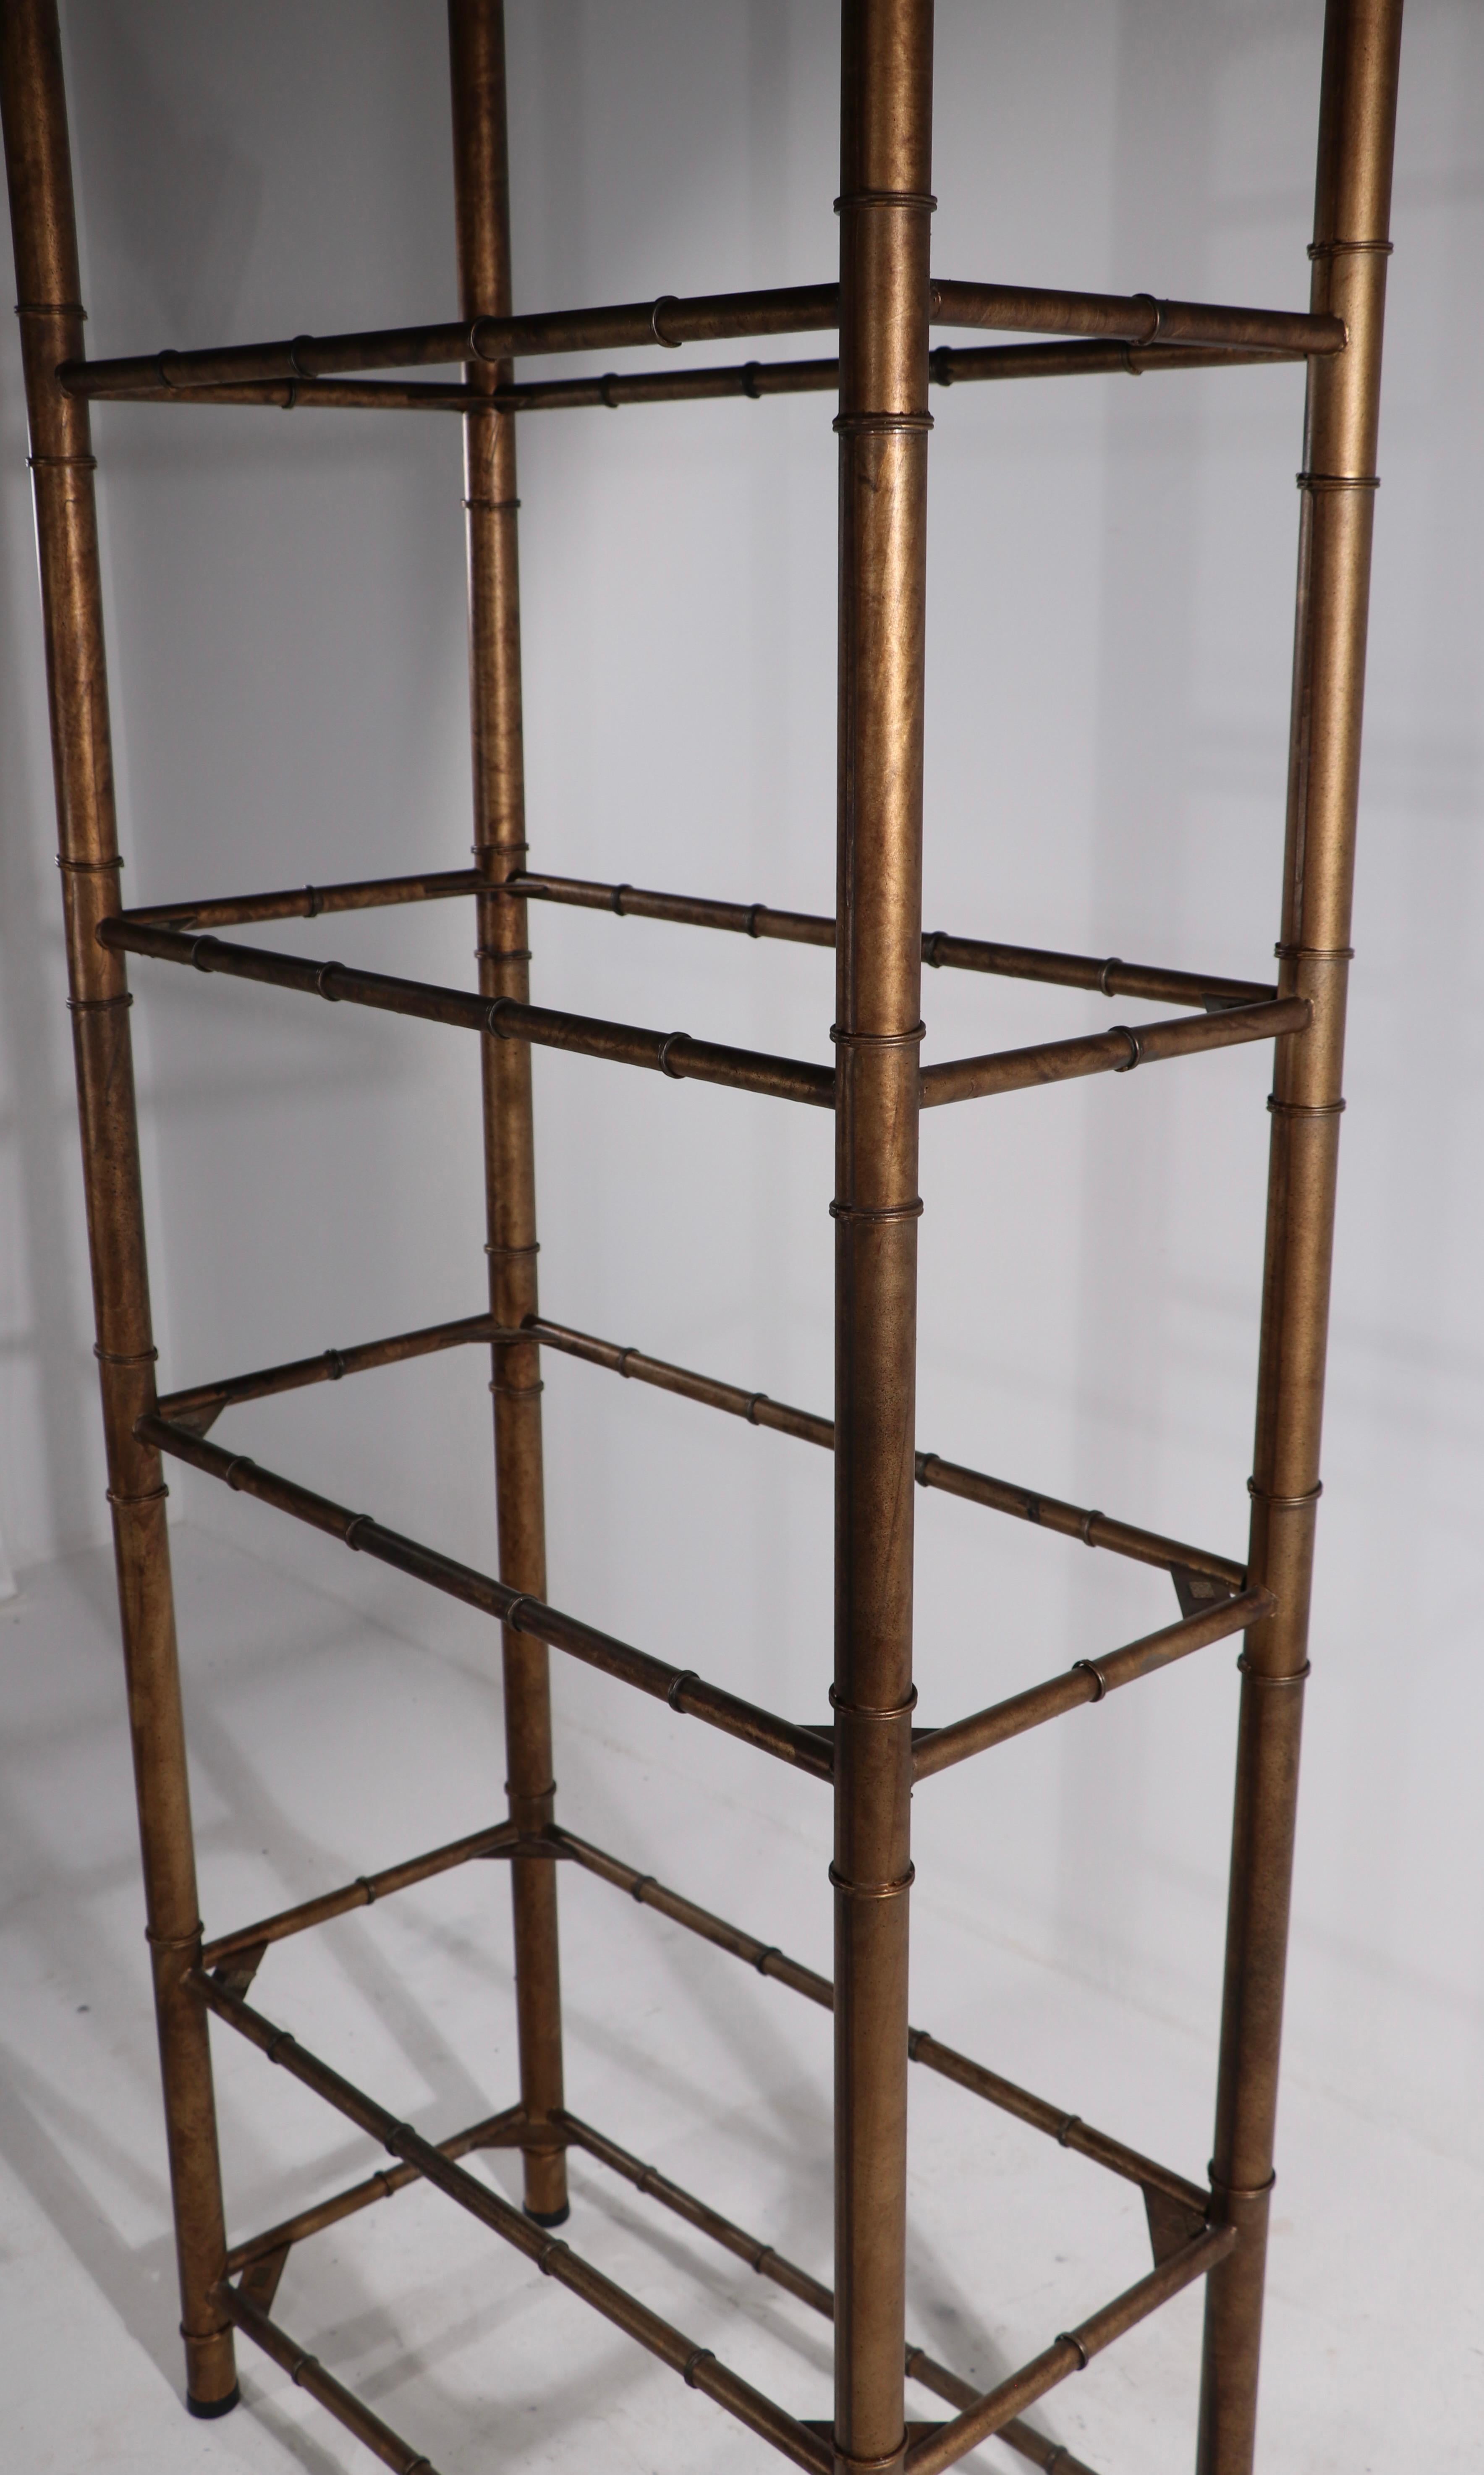 American Faux Bamboo Etagere, Display with Glass Shelves